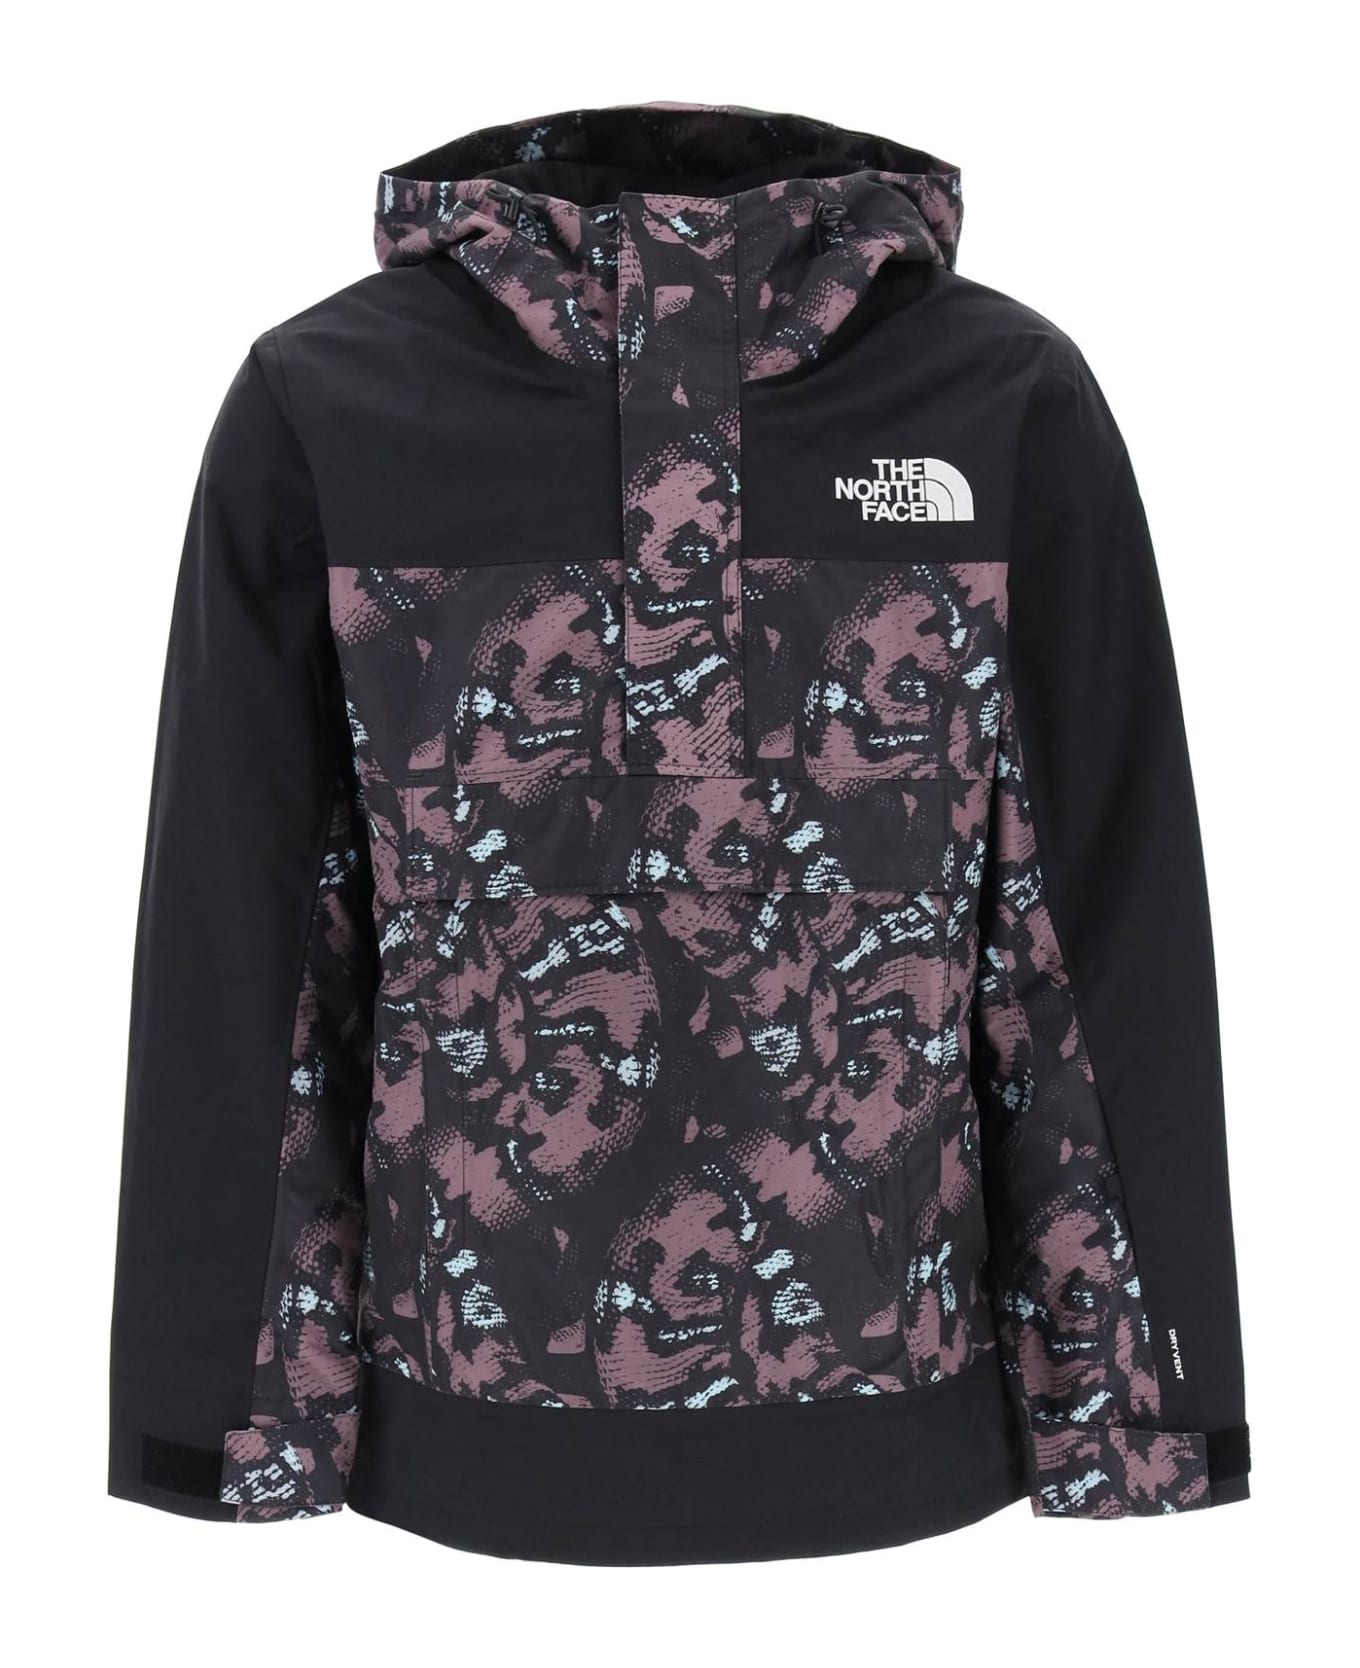 The North Face Driftview Ski Anorak - FAWN GREY SNAKE CHARMER (Black)